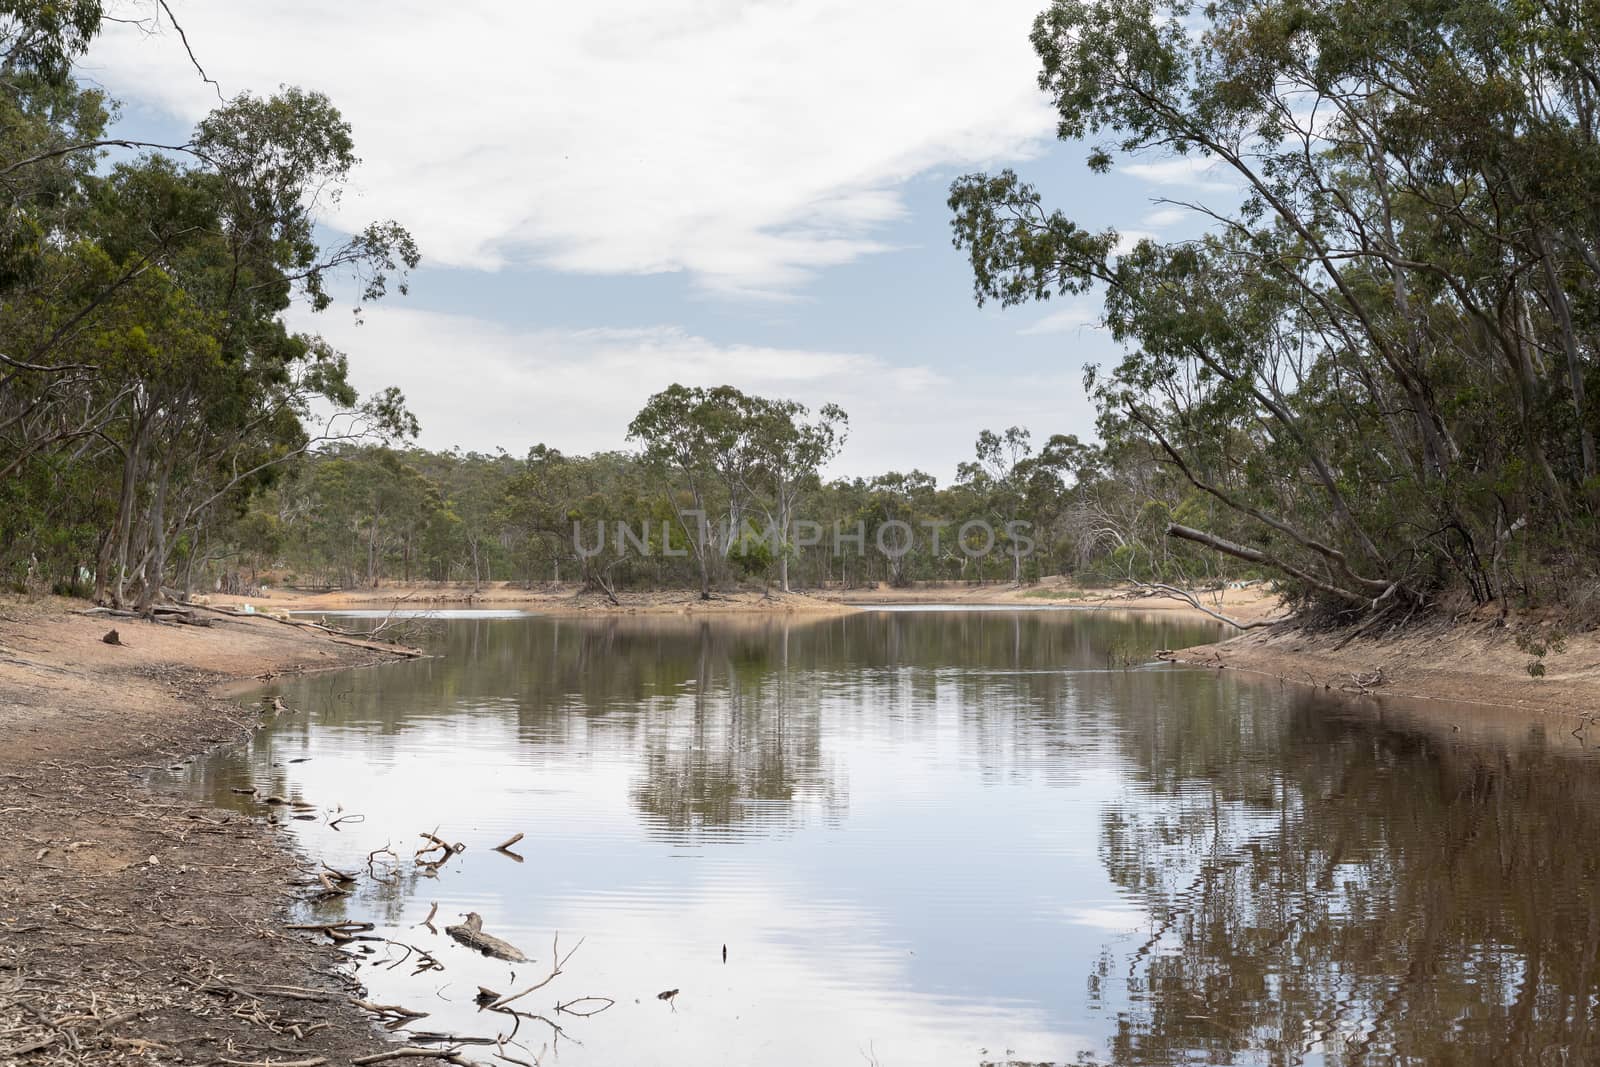 A drought affected water reservoir in regional Australia by WittkePhotos